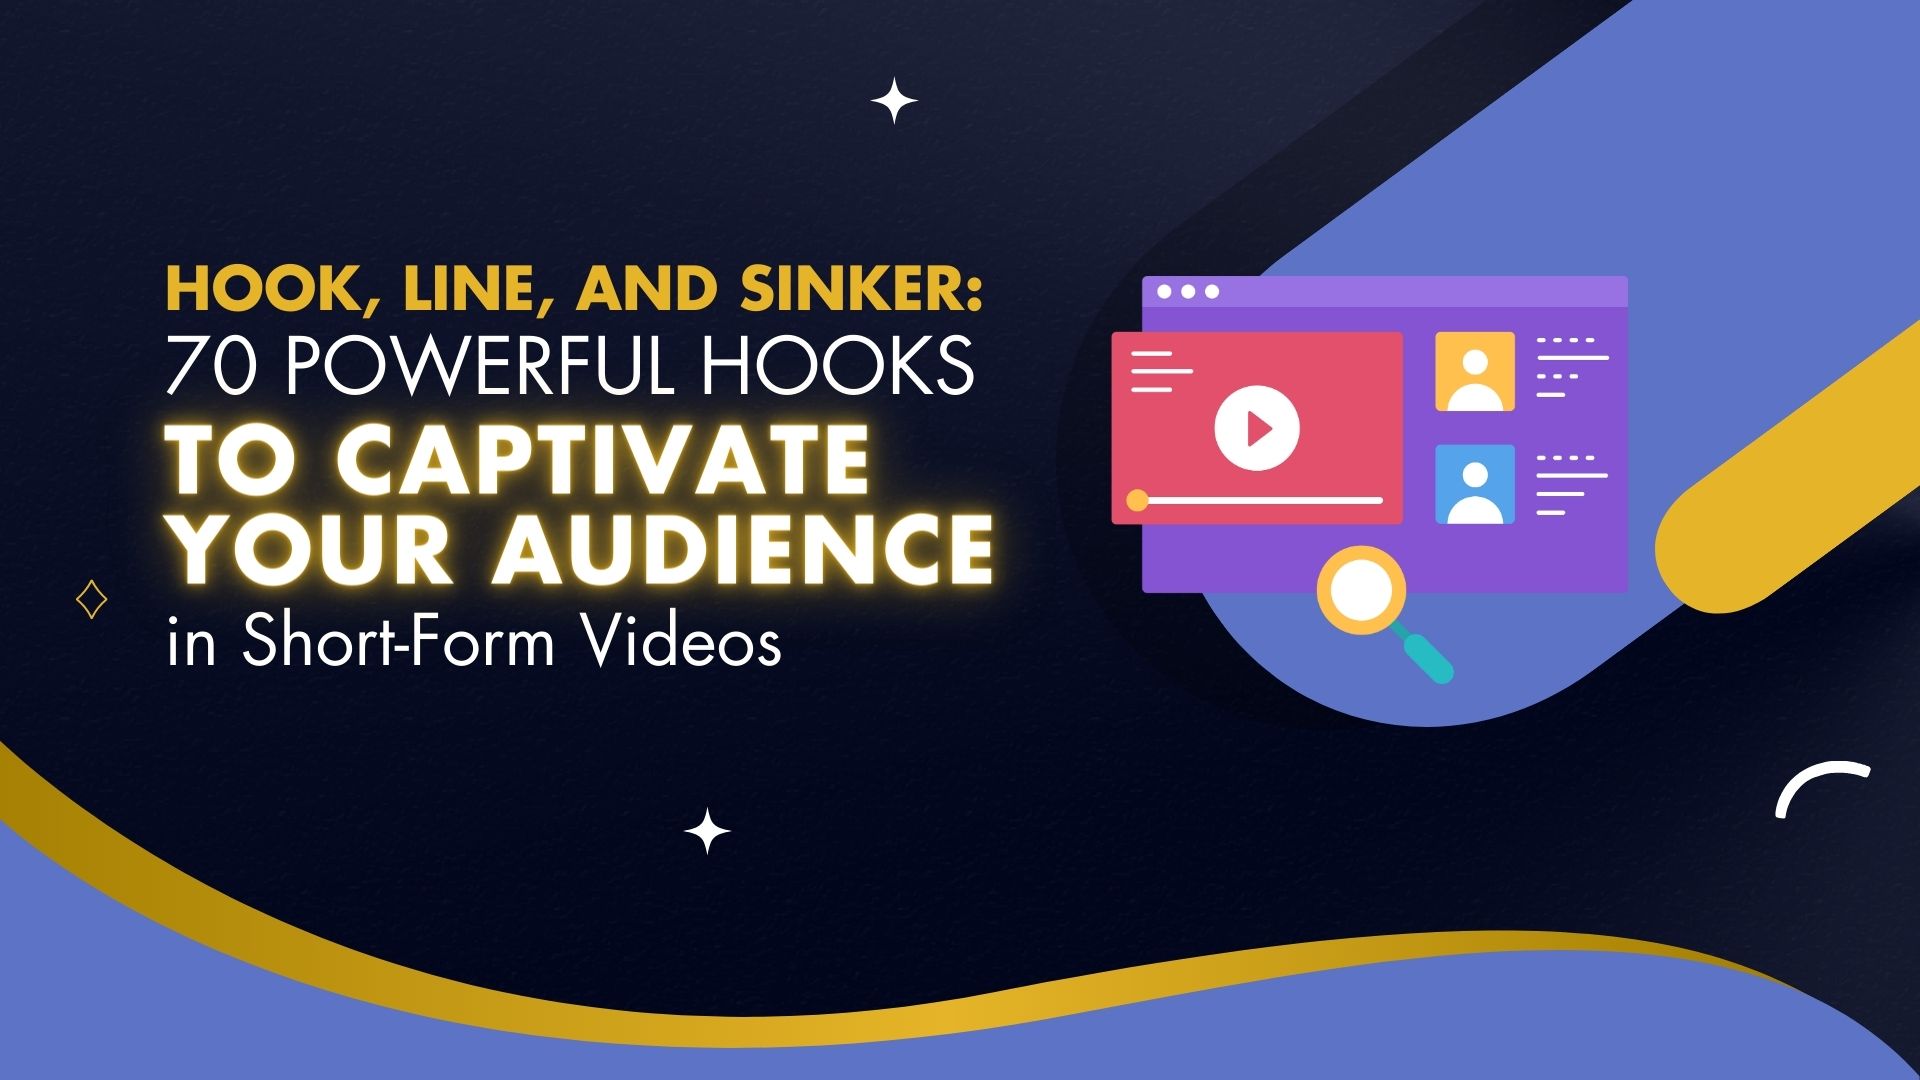 70 Powerful Hooks to Captivate Your Audience in Short-Form Videos